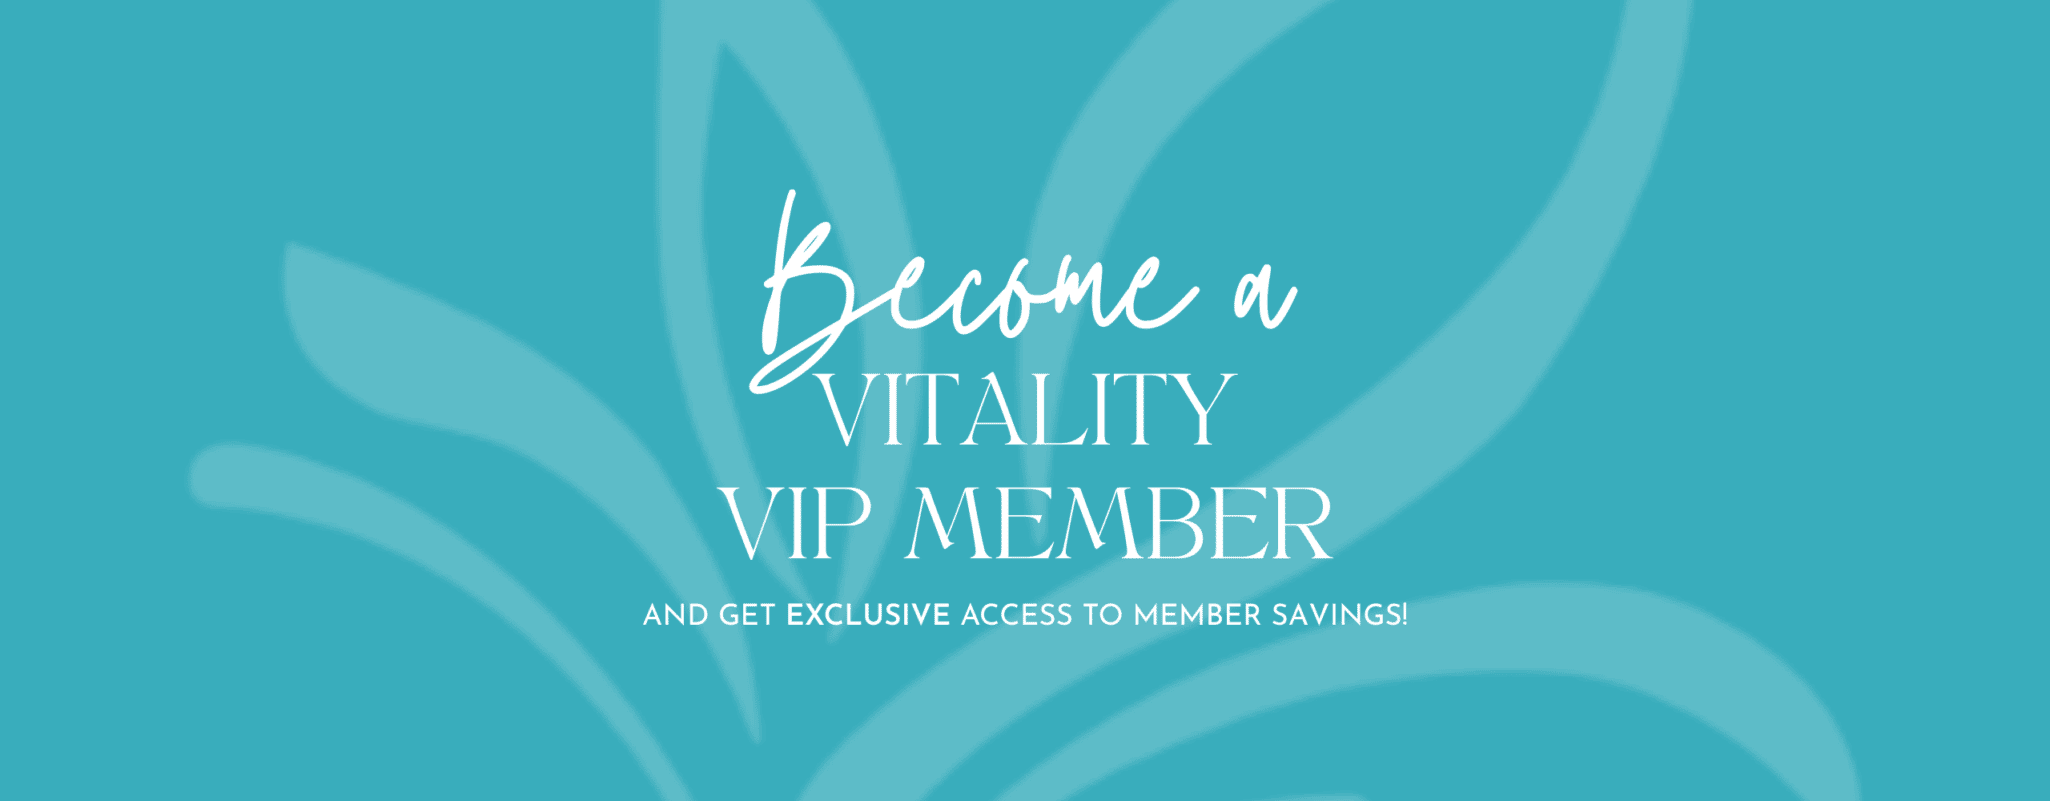 become a vitality vip member 1020 × 340 px Banner Landscape